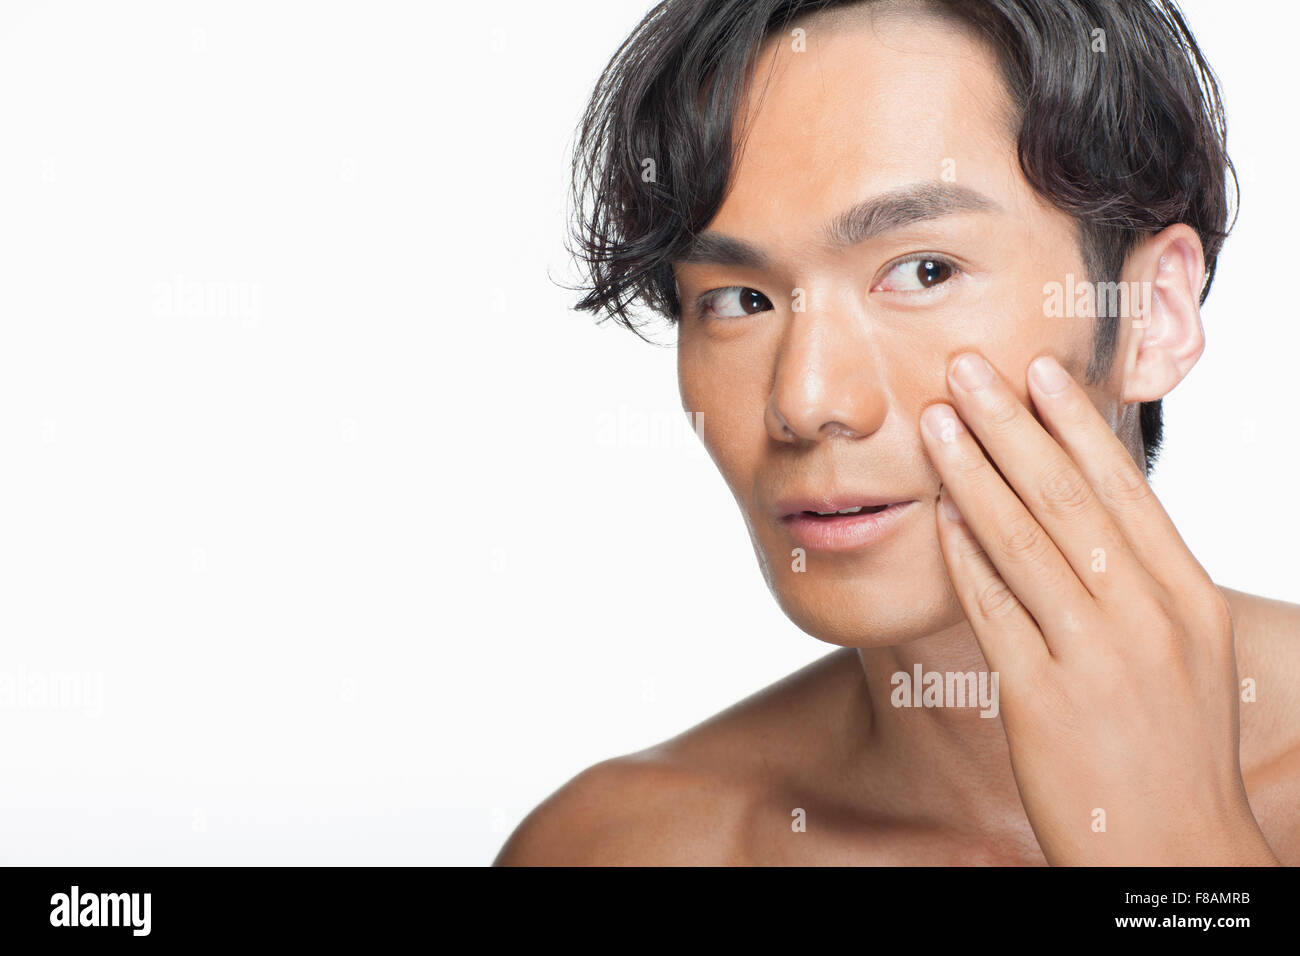 Portrait of young Asian man touching his cheek looking up Stock Photo